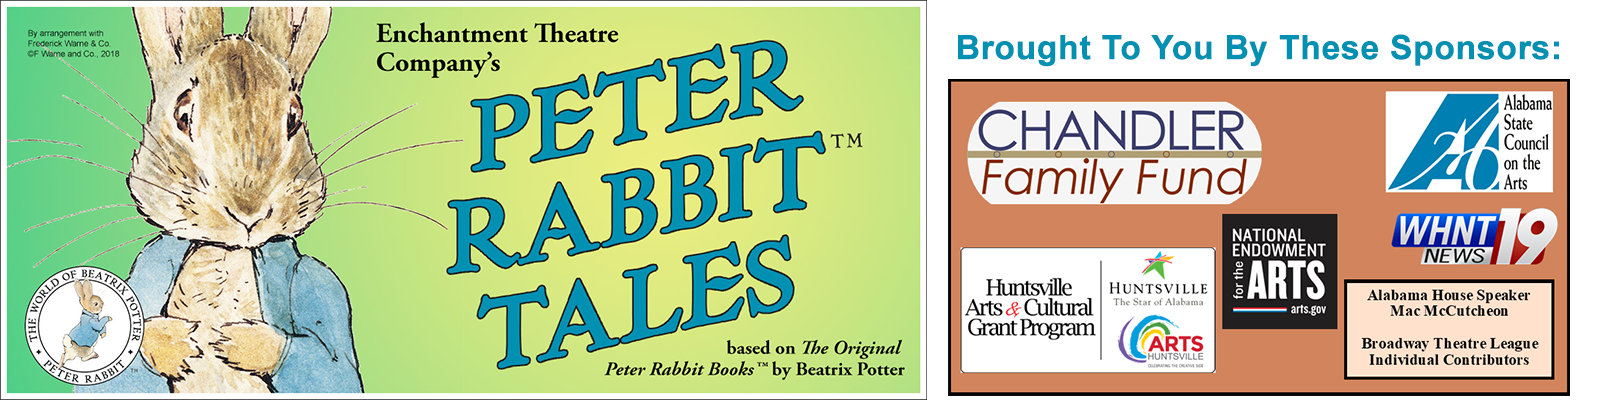 peter rabbit tales comes to broadway theatre league